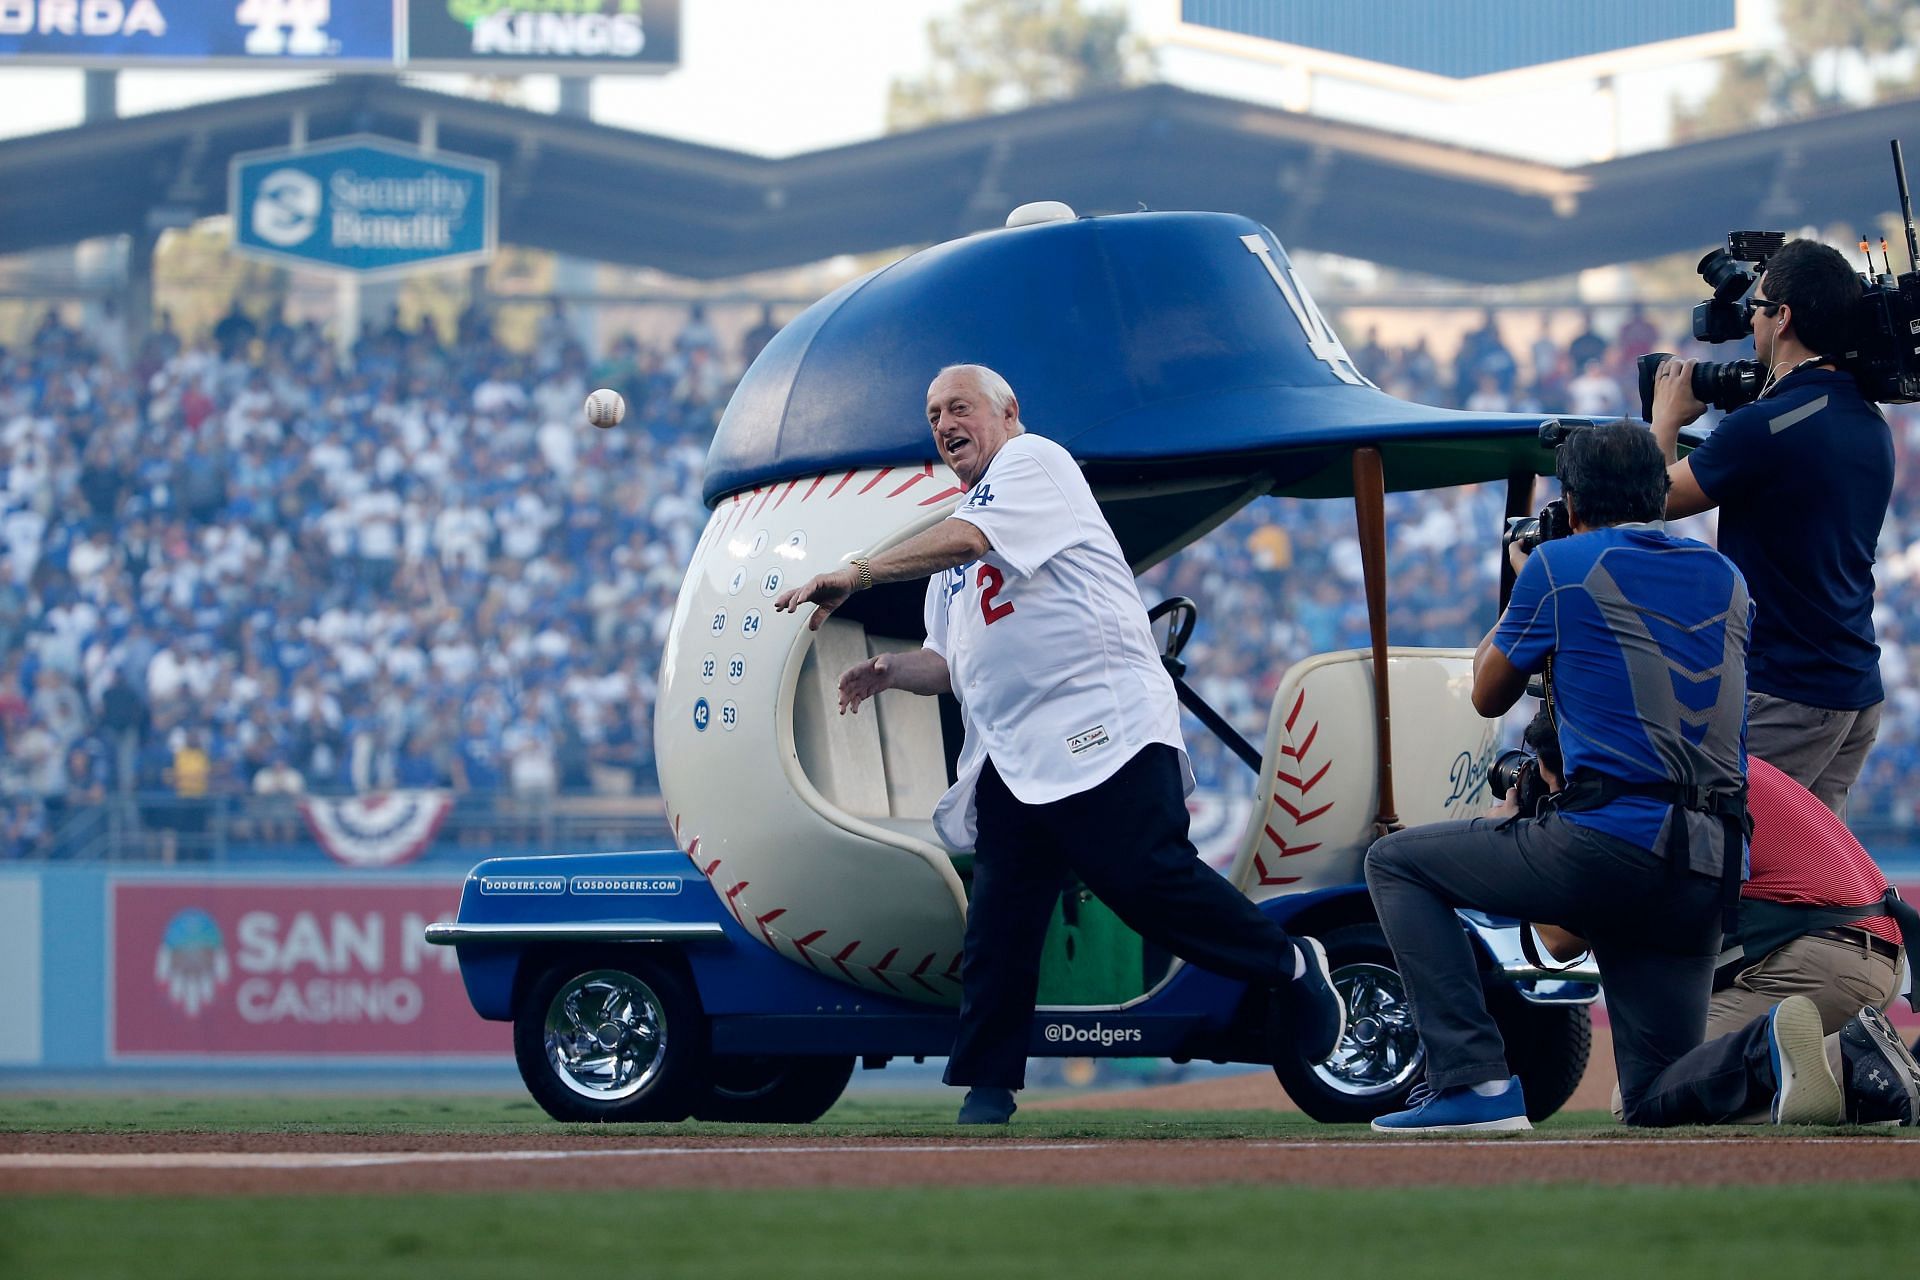 World Series - Boston Red Sox v Los Angeles Dodgers - Game Three: LOS ANGELES, CA - OCTOBER 26: Former Los Angeles Dodgers player and manager Tommy Lasorda throws the ceremonial first pitch prior to Game Three of the 2018 World Series between the Los Angeles Dodgers and the Boston Red Sox at Dodger Stadium on October 26, 2018, in Los Angeles, California. (Photo by Eugene Garcia - Pool/Getty Images)